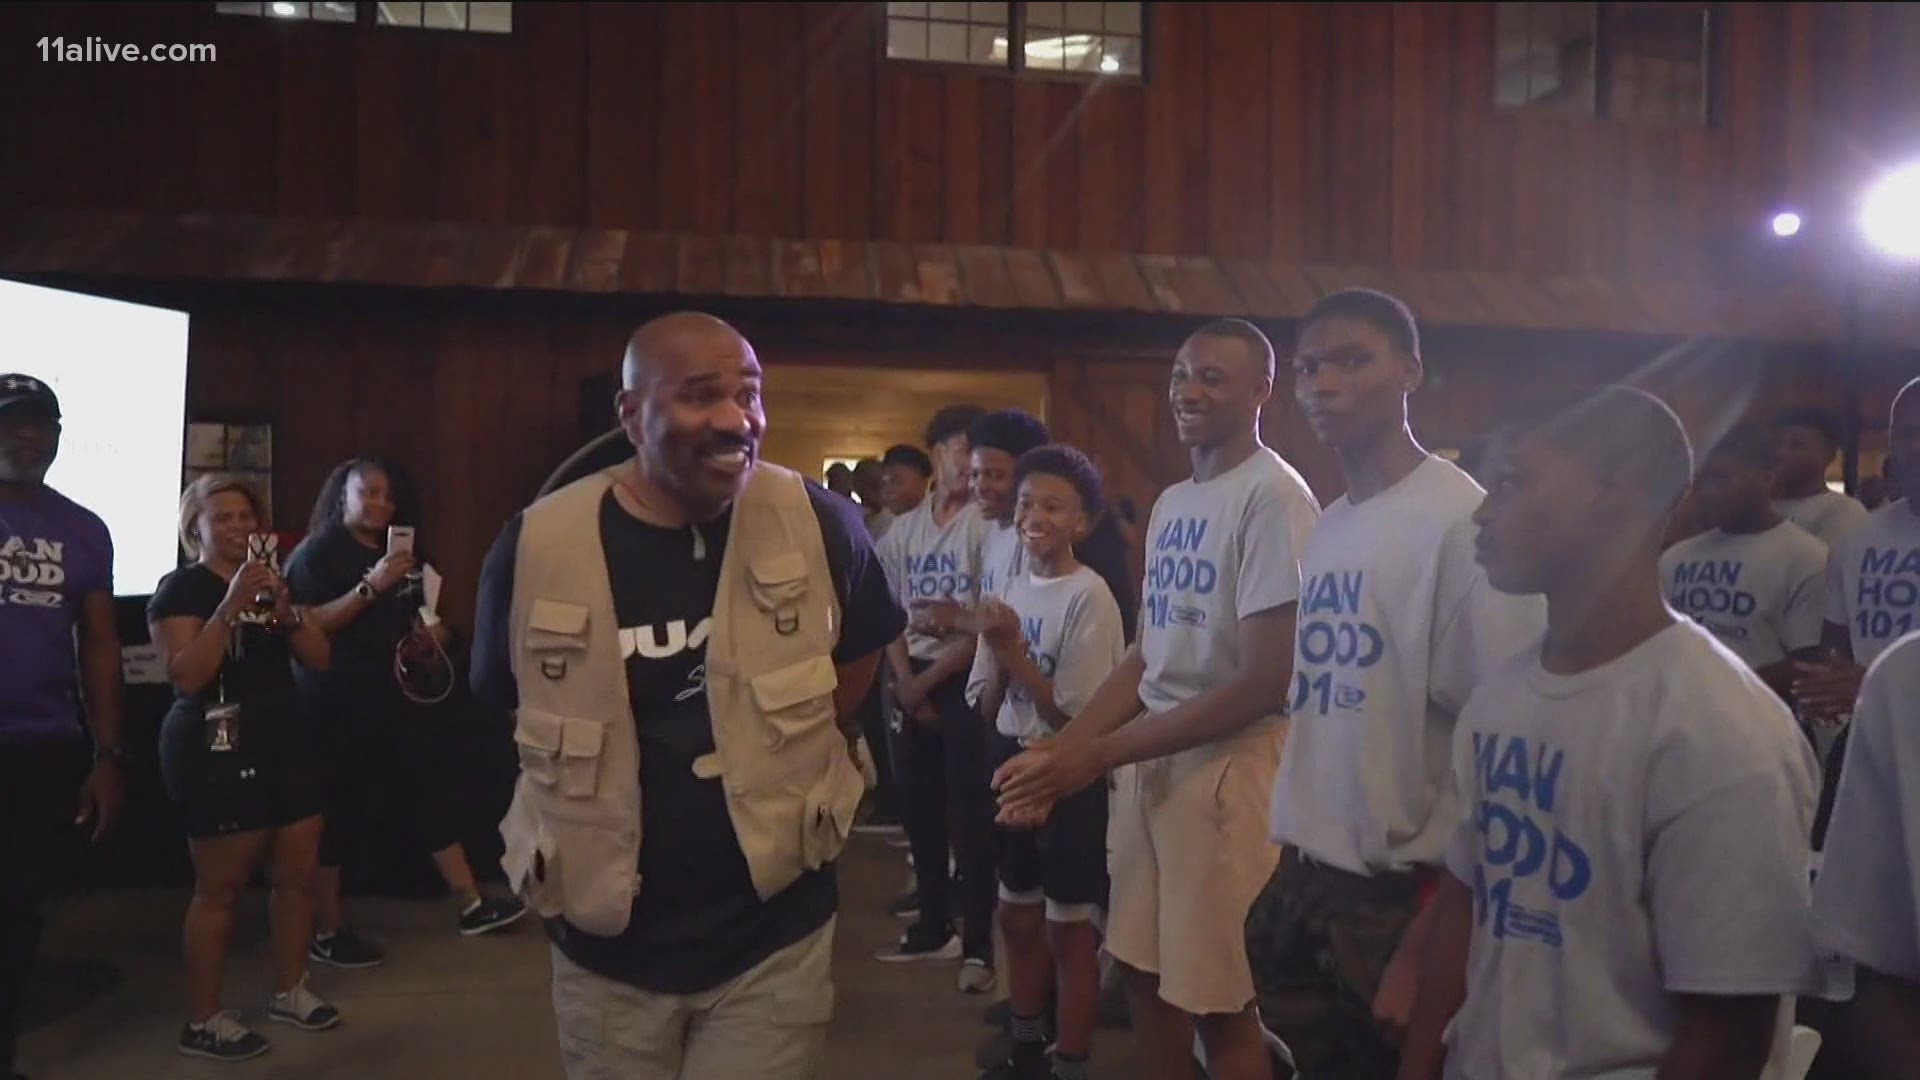 For years, the Steve Harvey Mentor Program has been helping middle and high school boys all across the country. But during the pandemic, they've had to adapt.